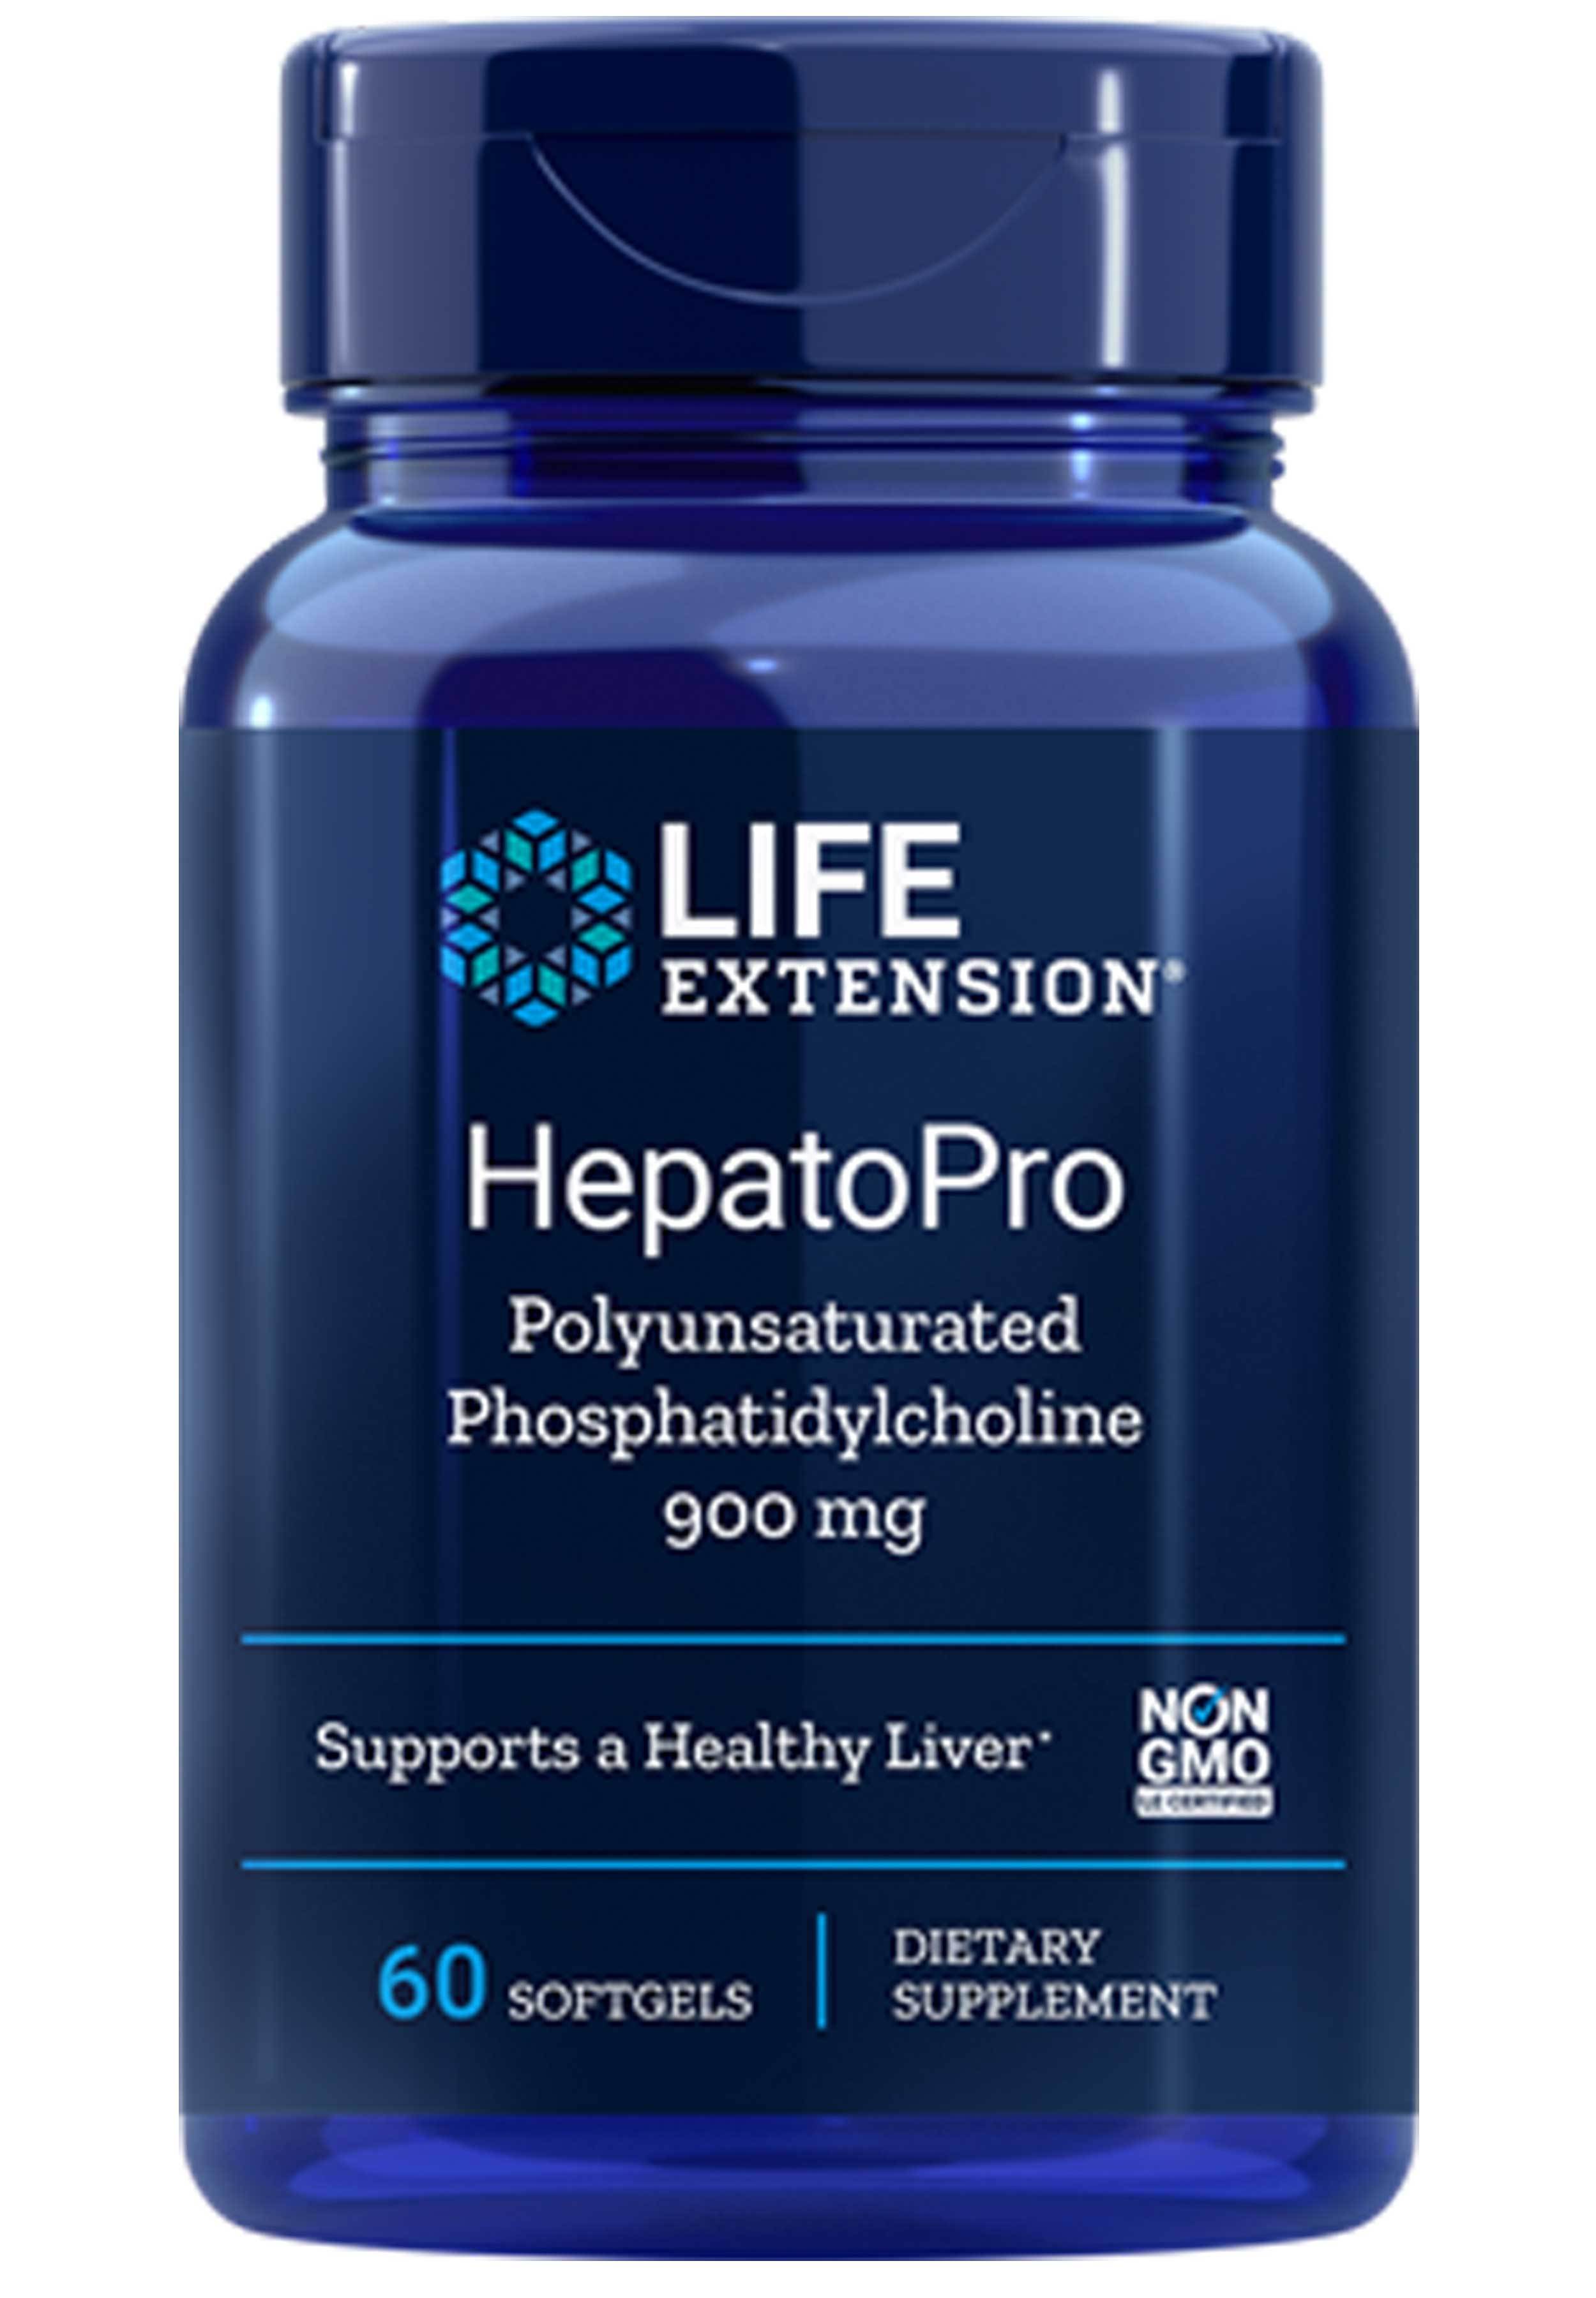 Life Extension HepatoPro (Polyunsaturated Phosphatidylcholine)